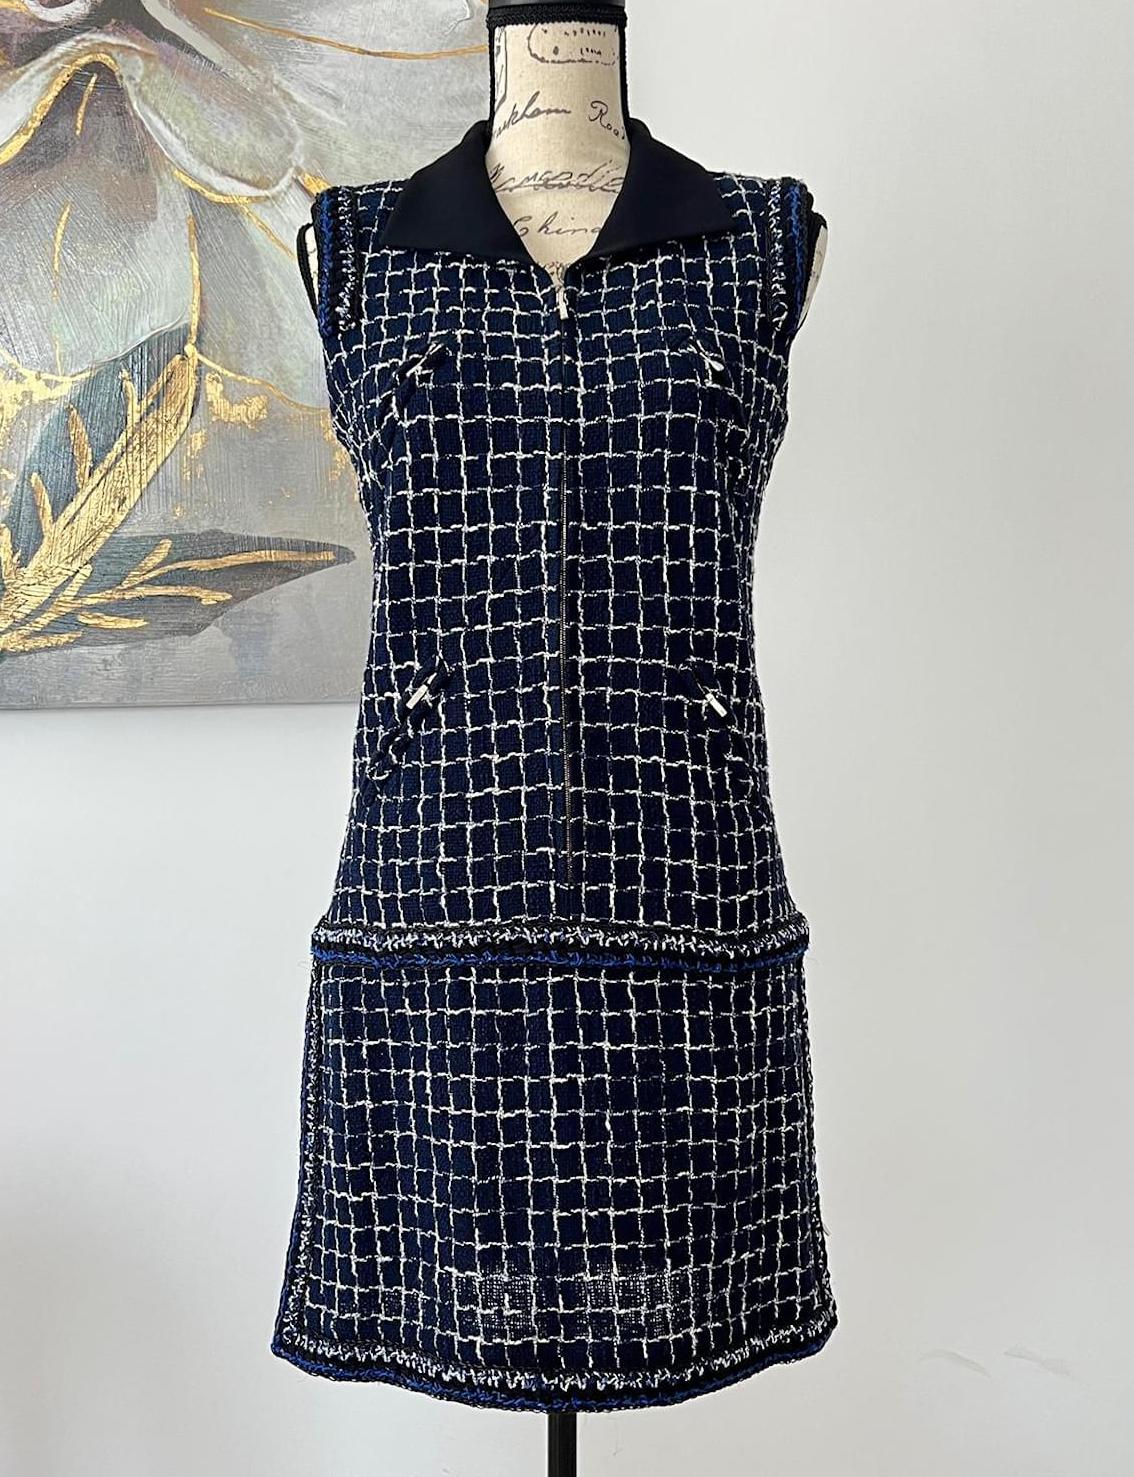 Chanel Graffiti Collection Lesage Tweed Dress For Sale 2